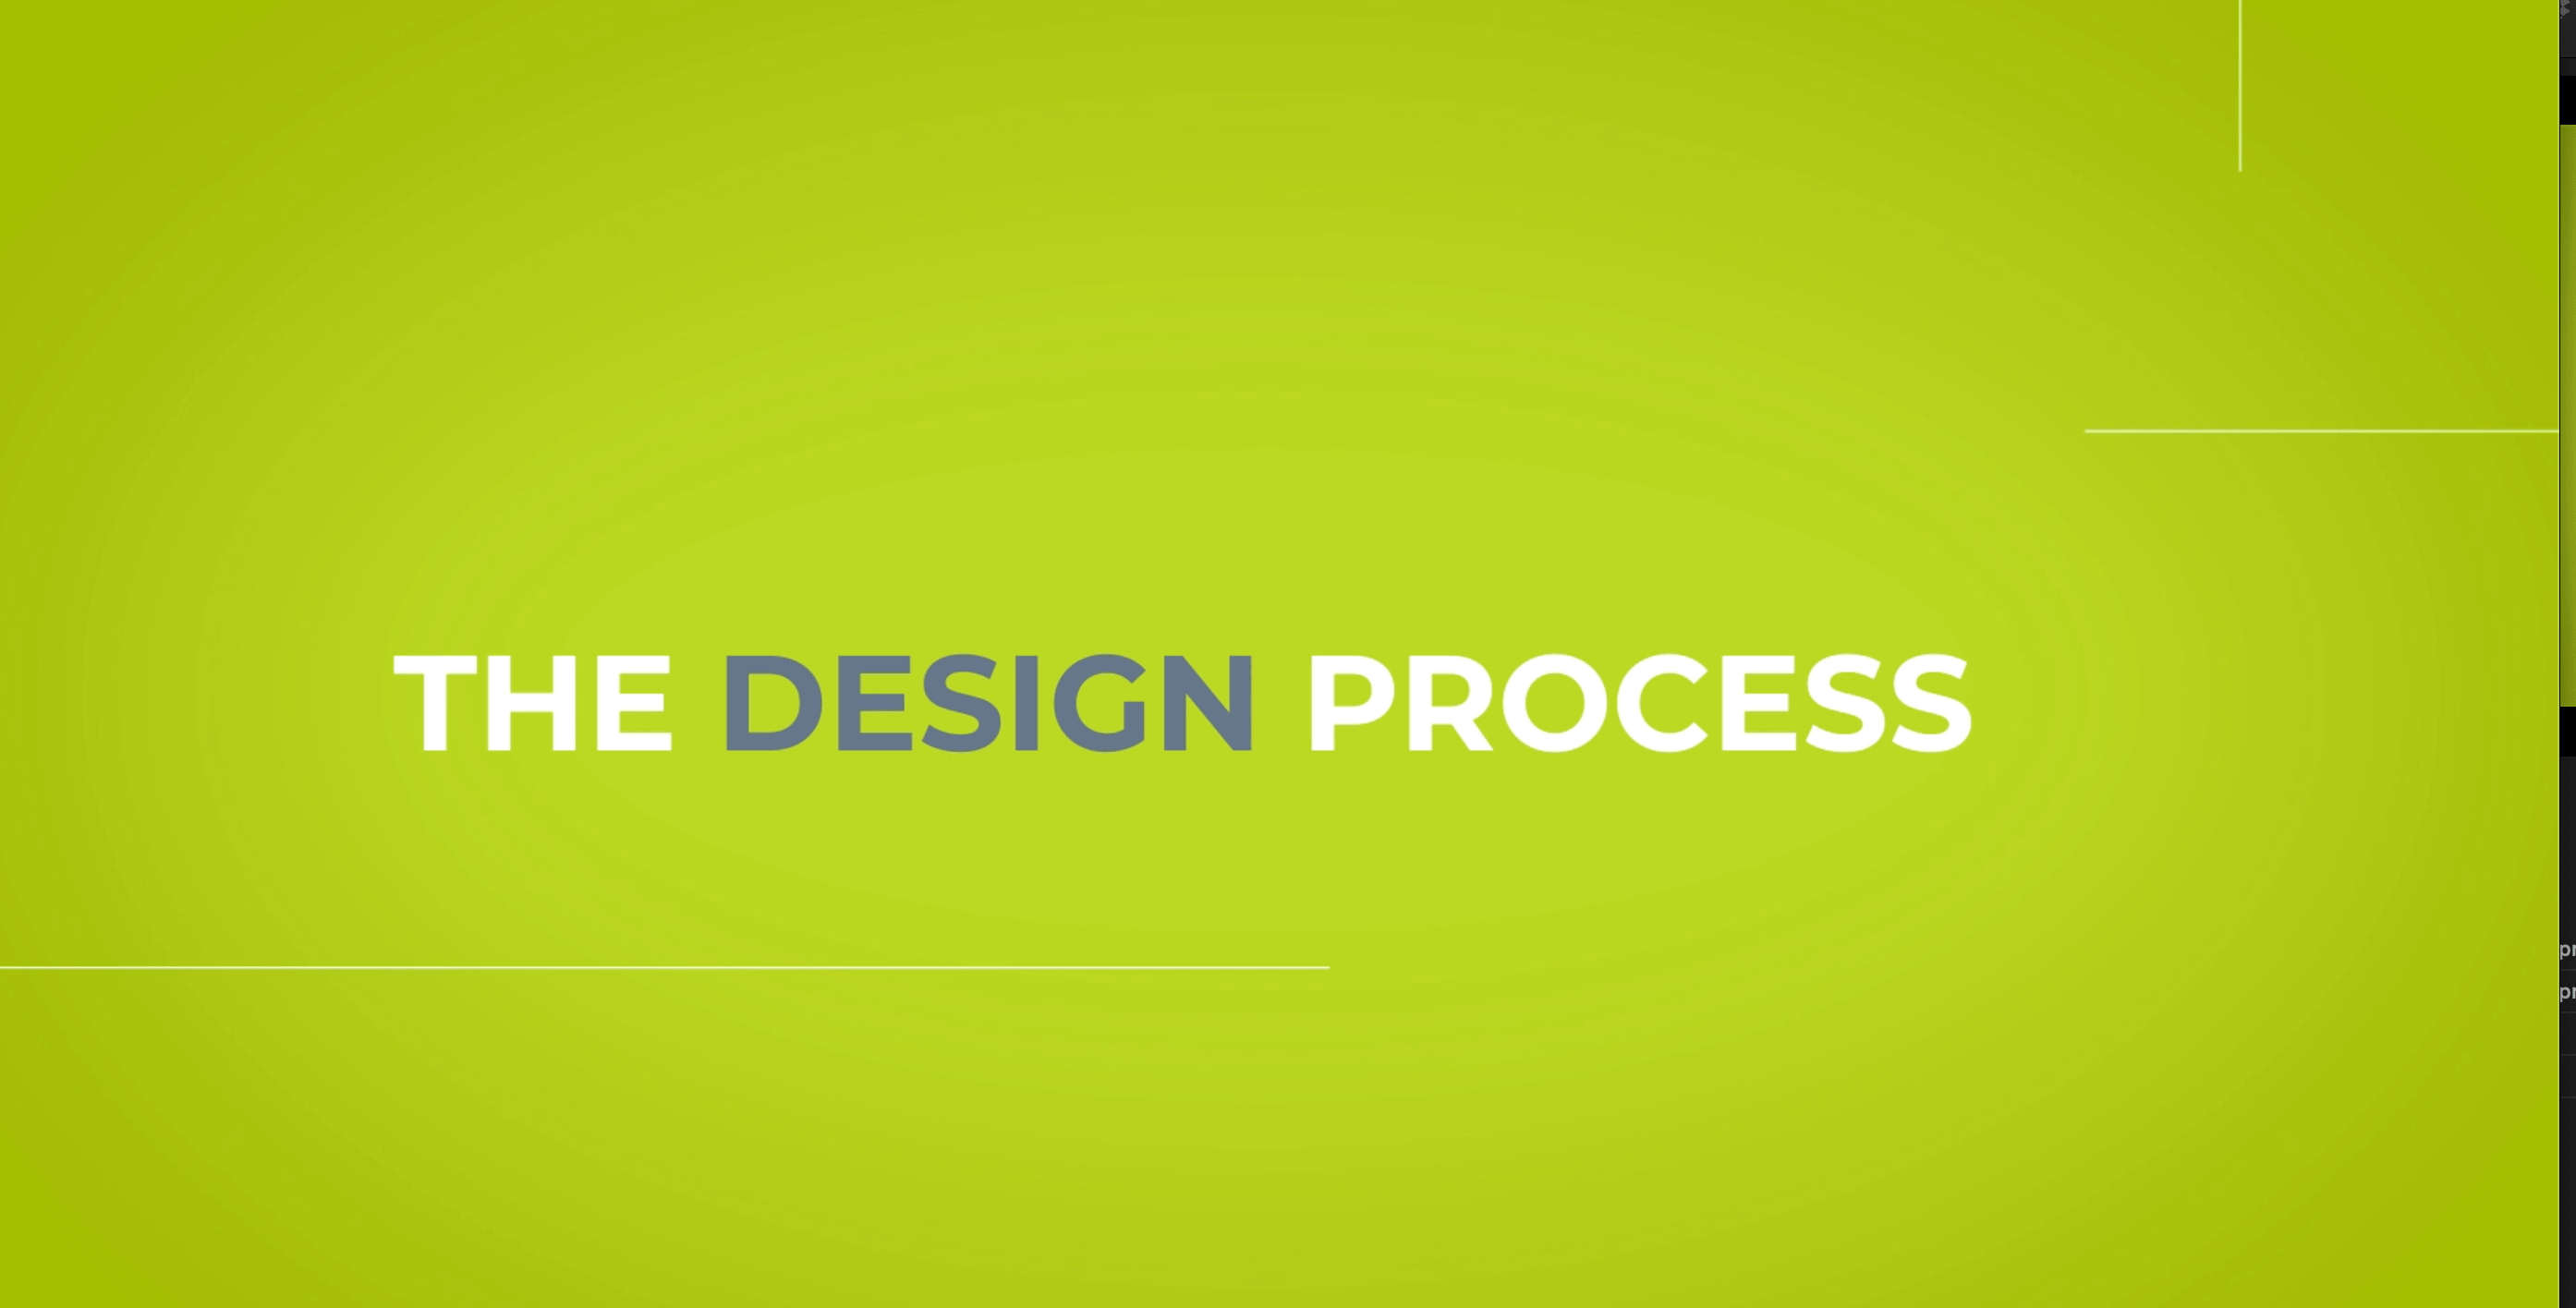 Our Design Process: Combining Expertise and Technology to Get It Right